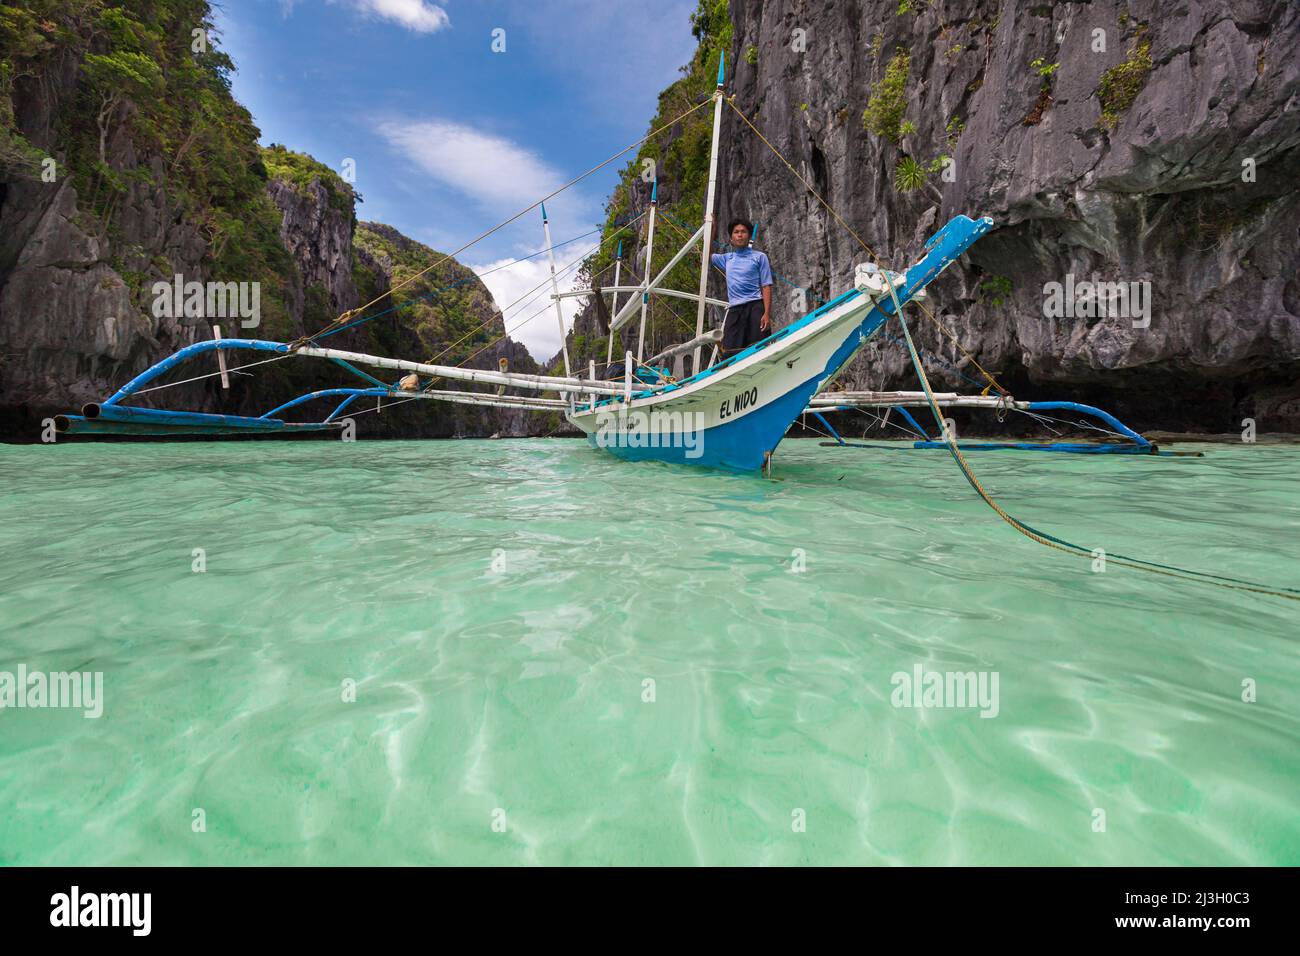 Philippines, Palawan, El Nido, Bacuit Archipelago, Miniloc Island, an outrigger canoe bearing the name El Nido comes out of Big Lagoon, on turquoise water Stock Photo